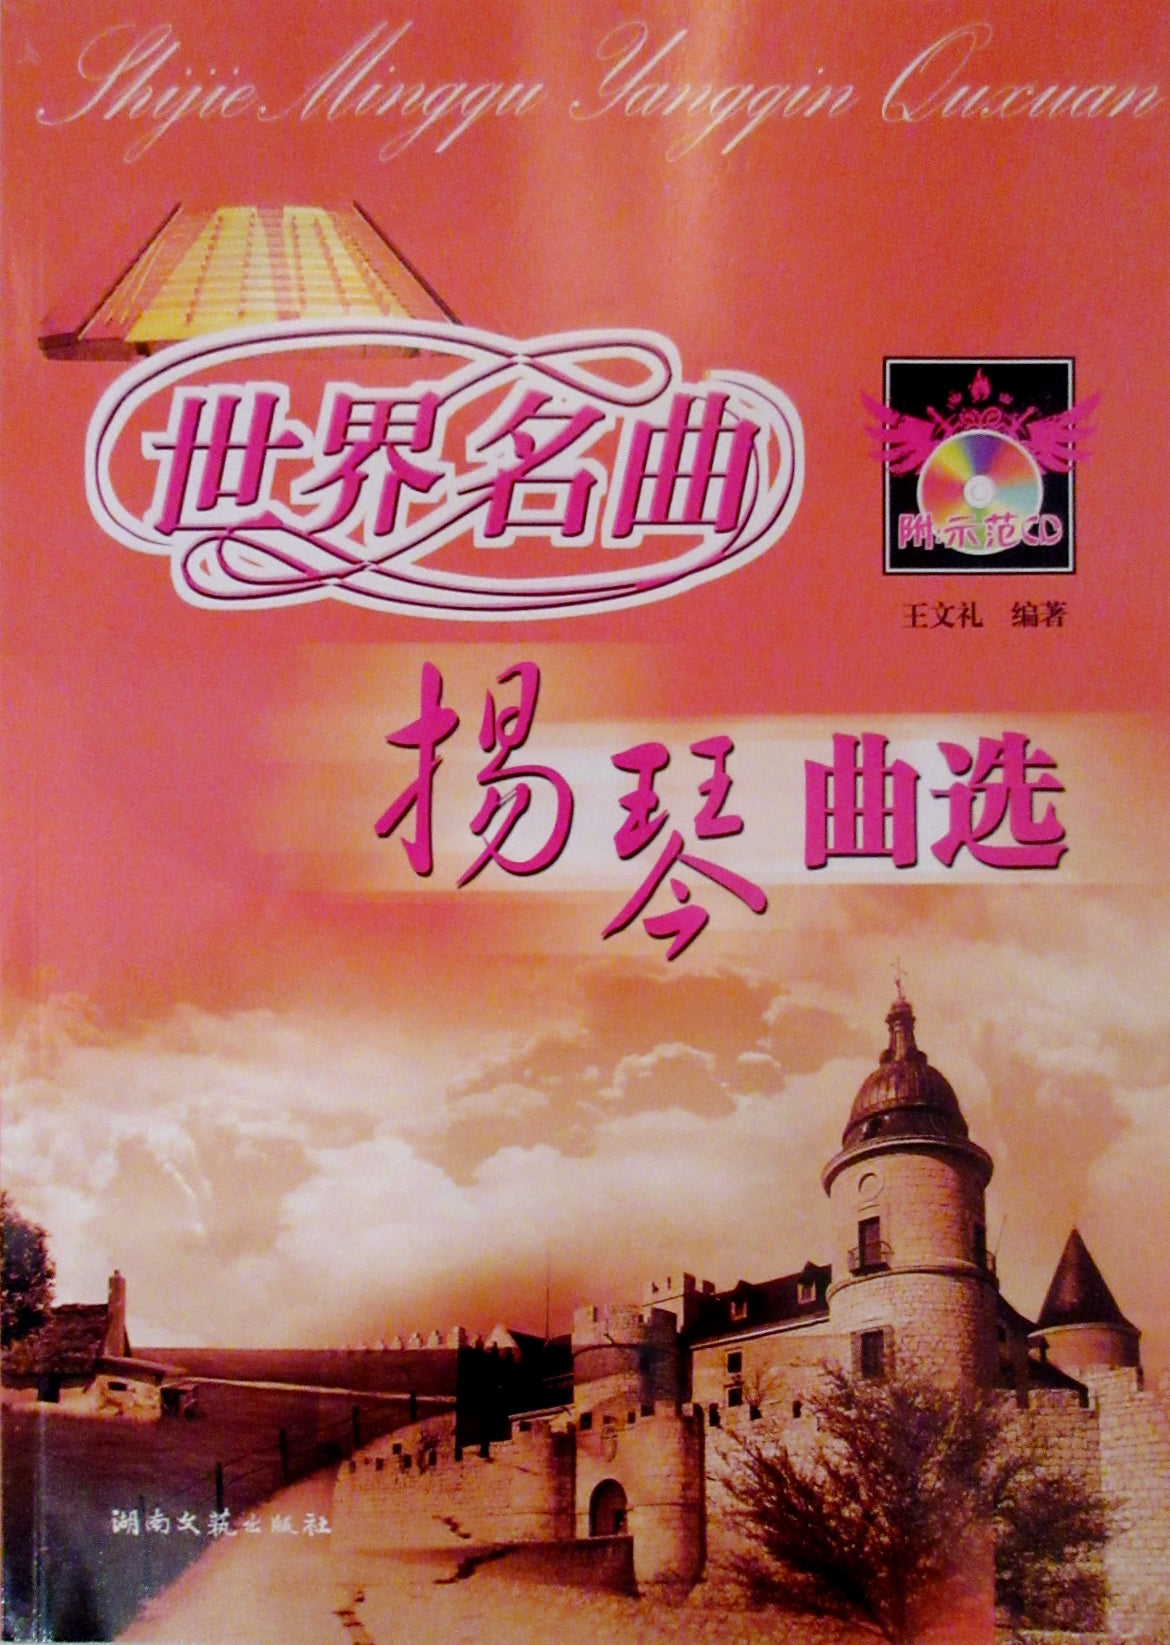 Collection of World Well-known Songs for Yangqin 世界名曲 扬琴曲选